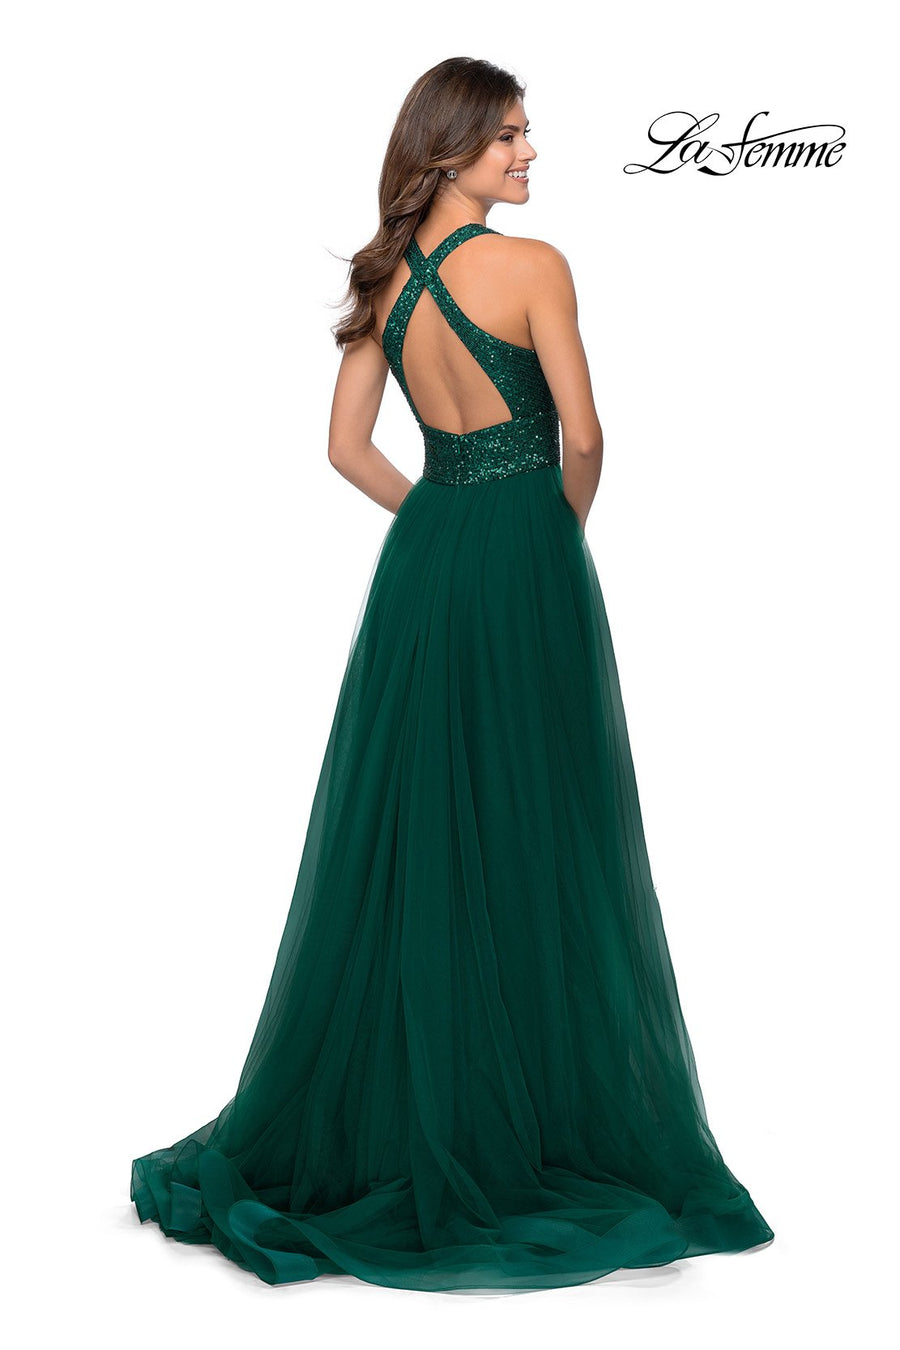 La Femme 28908 prom dress images.  La Femme 28908 is available in these colors: Emerald, Red, Royal Blue.